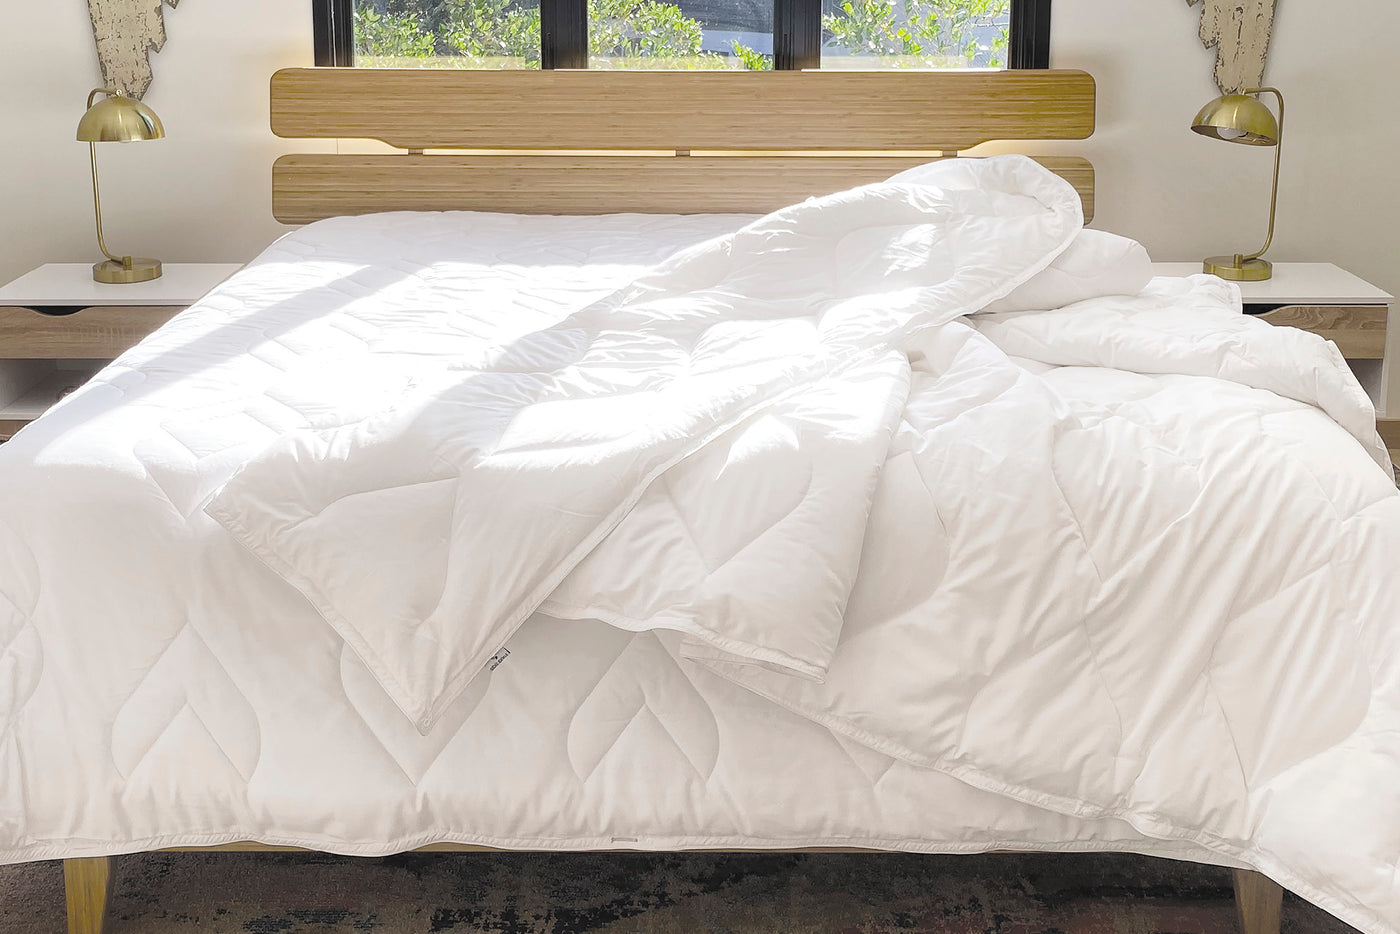 Image of a bed with the Duvet Insert + Cooling on top without a Duvet Cover